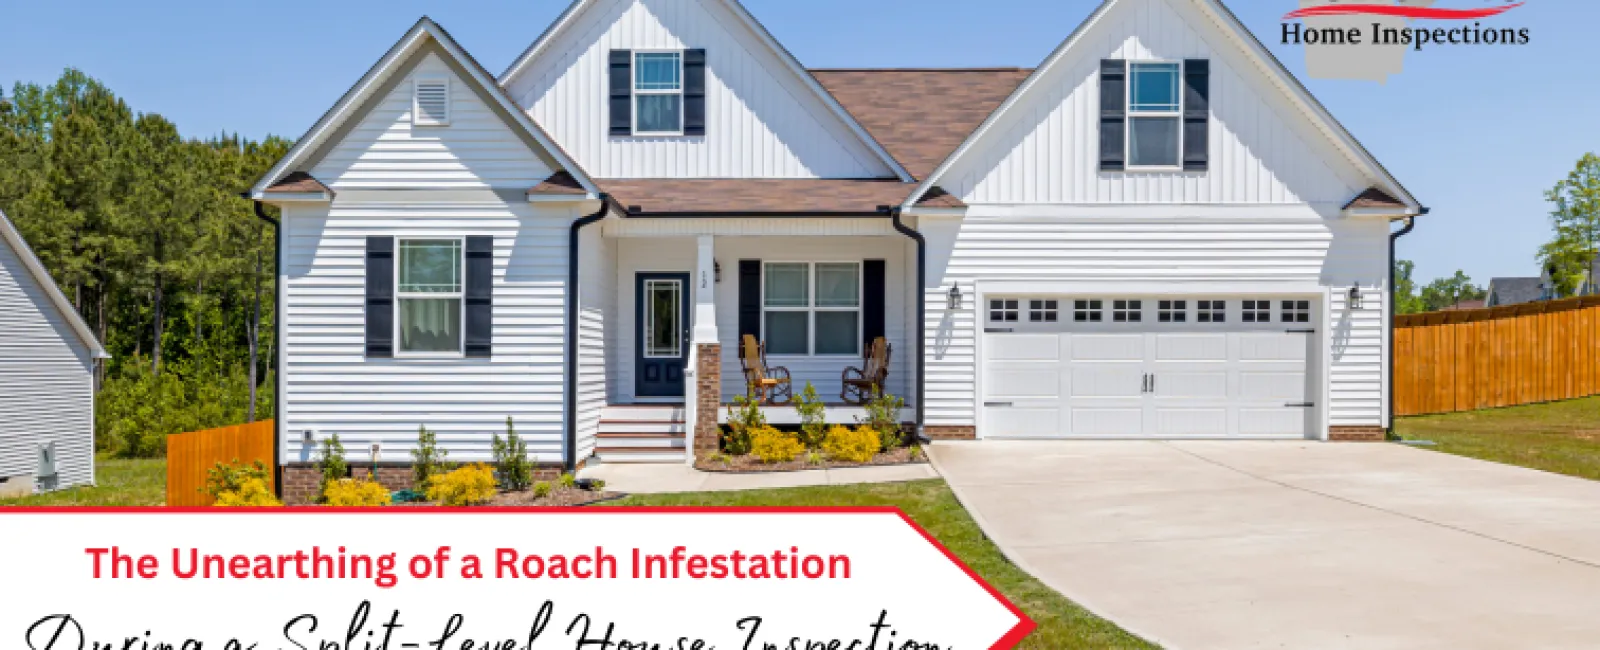 The Unearthing of a Roach Infestation During a Split-Level House Inspection